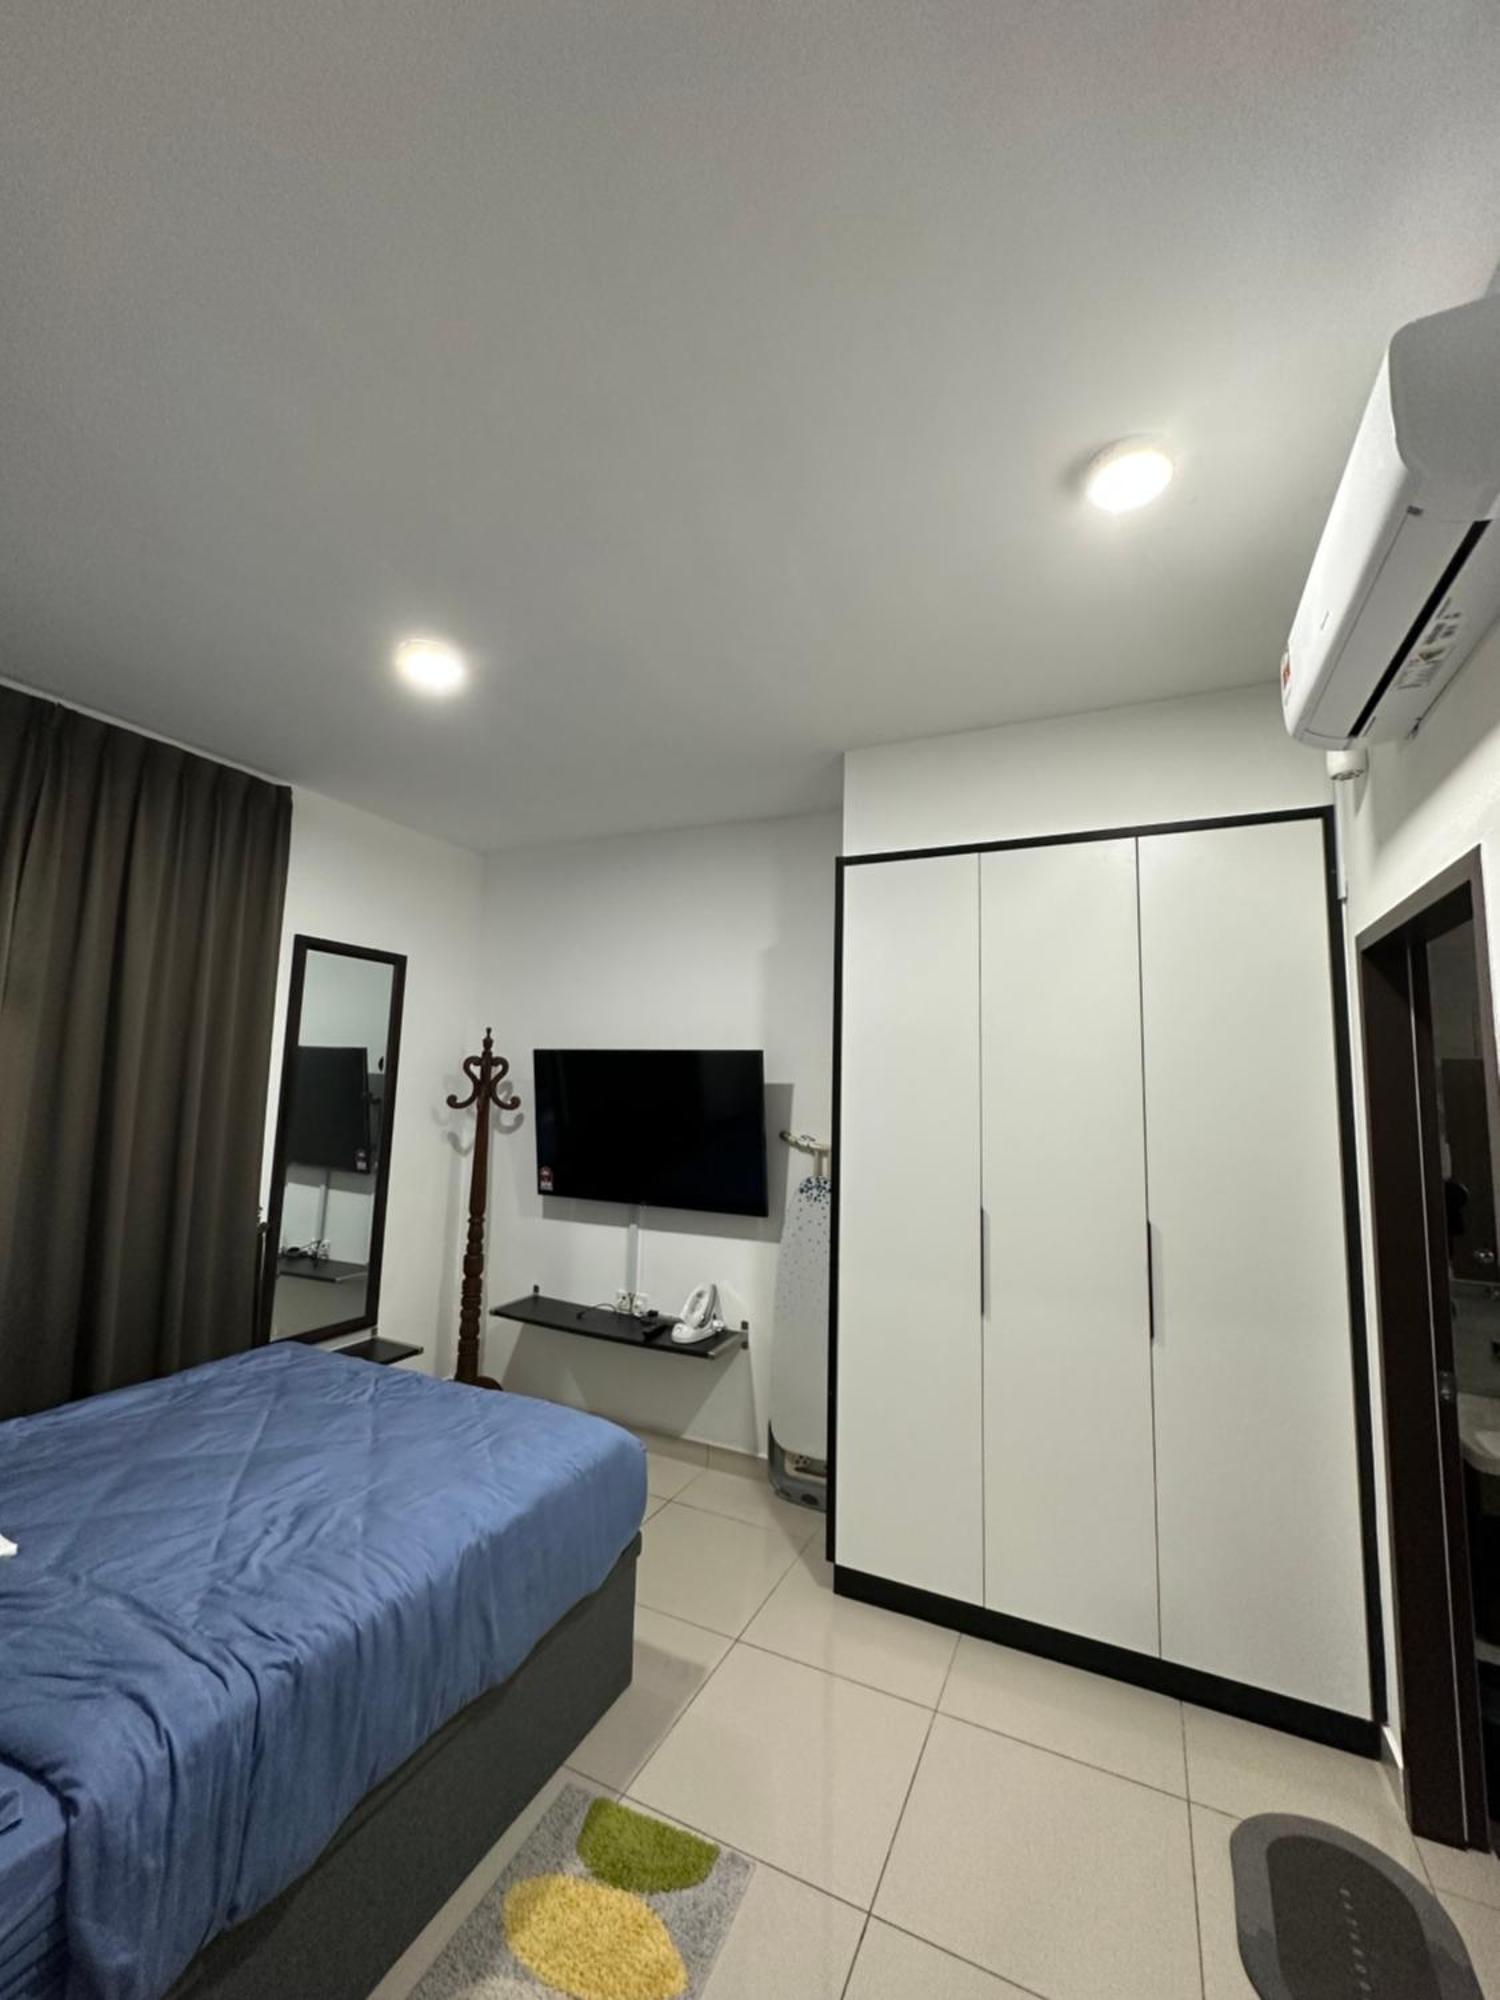 Desaru Dhancell Executive Homestay All Bedrooms With Netflix Bagian luar foto